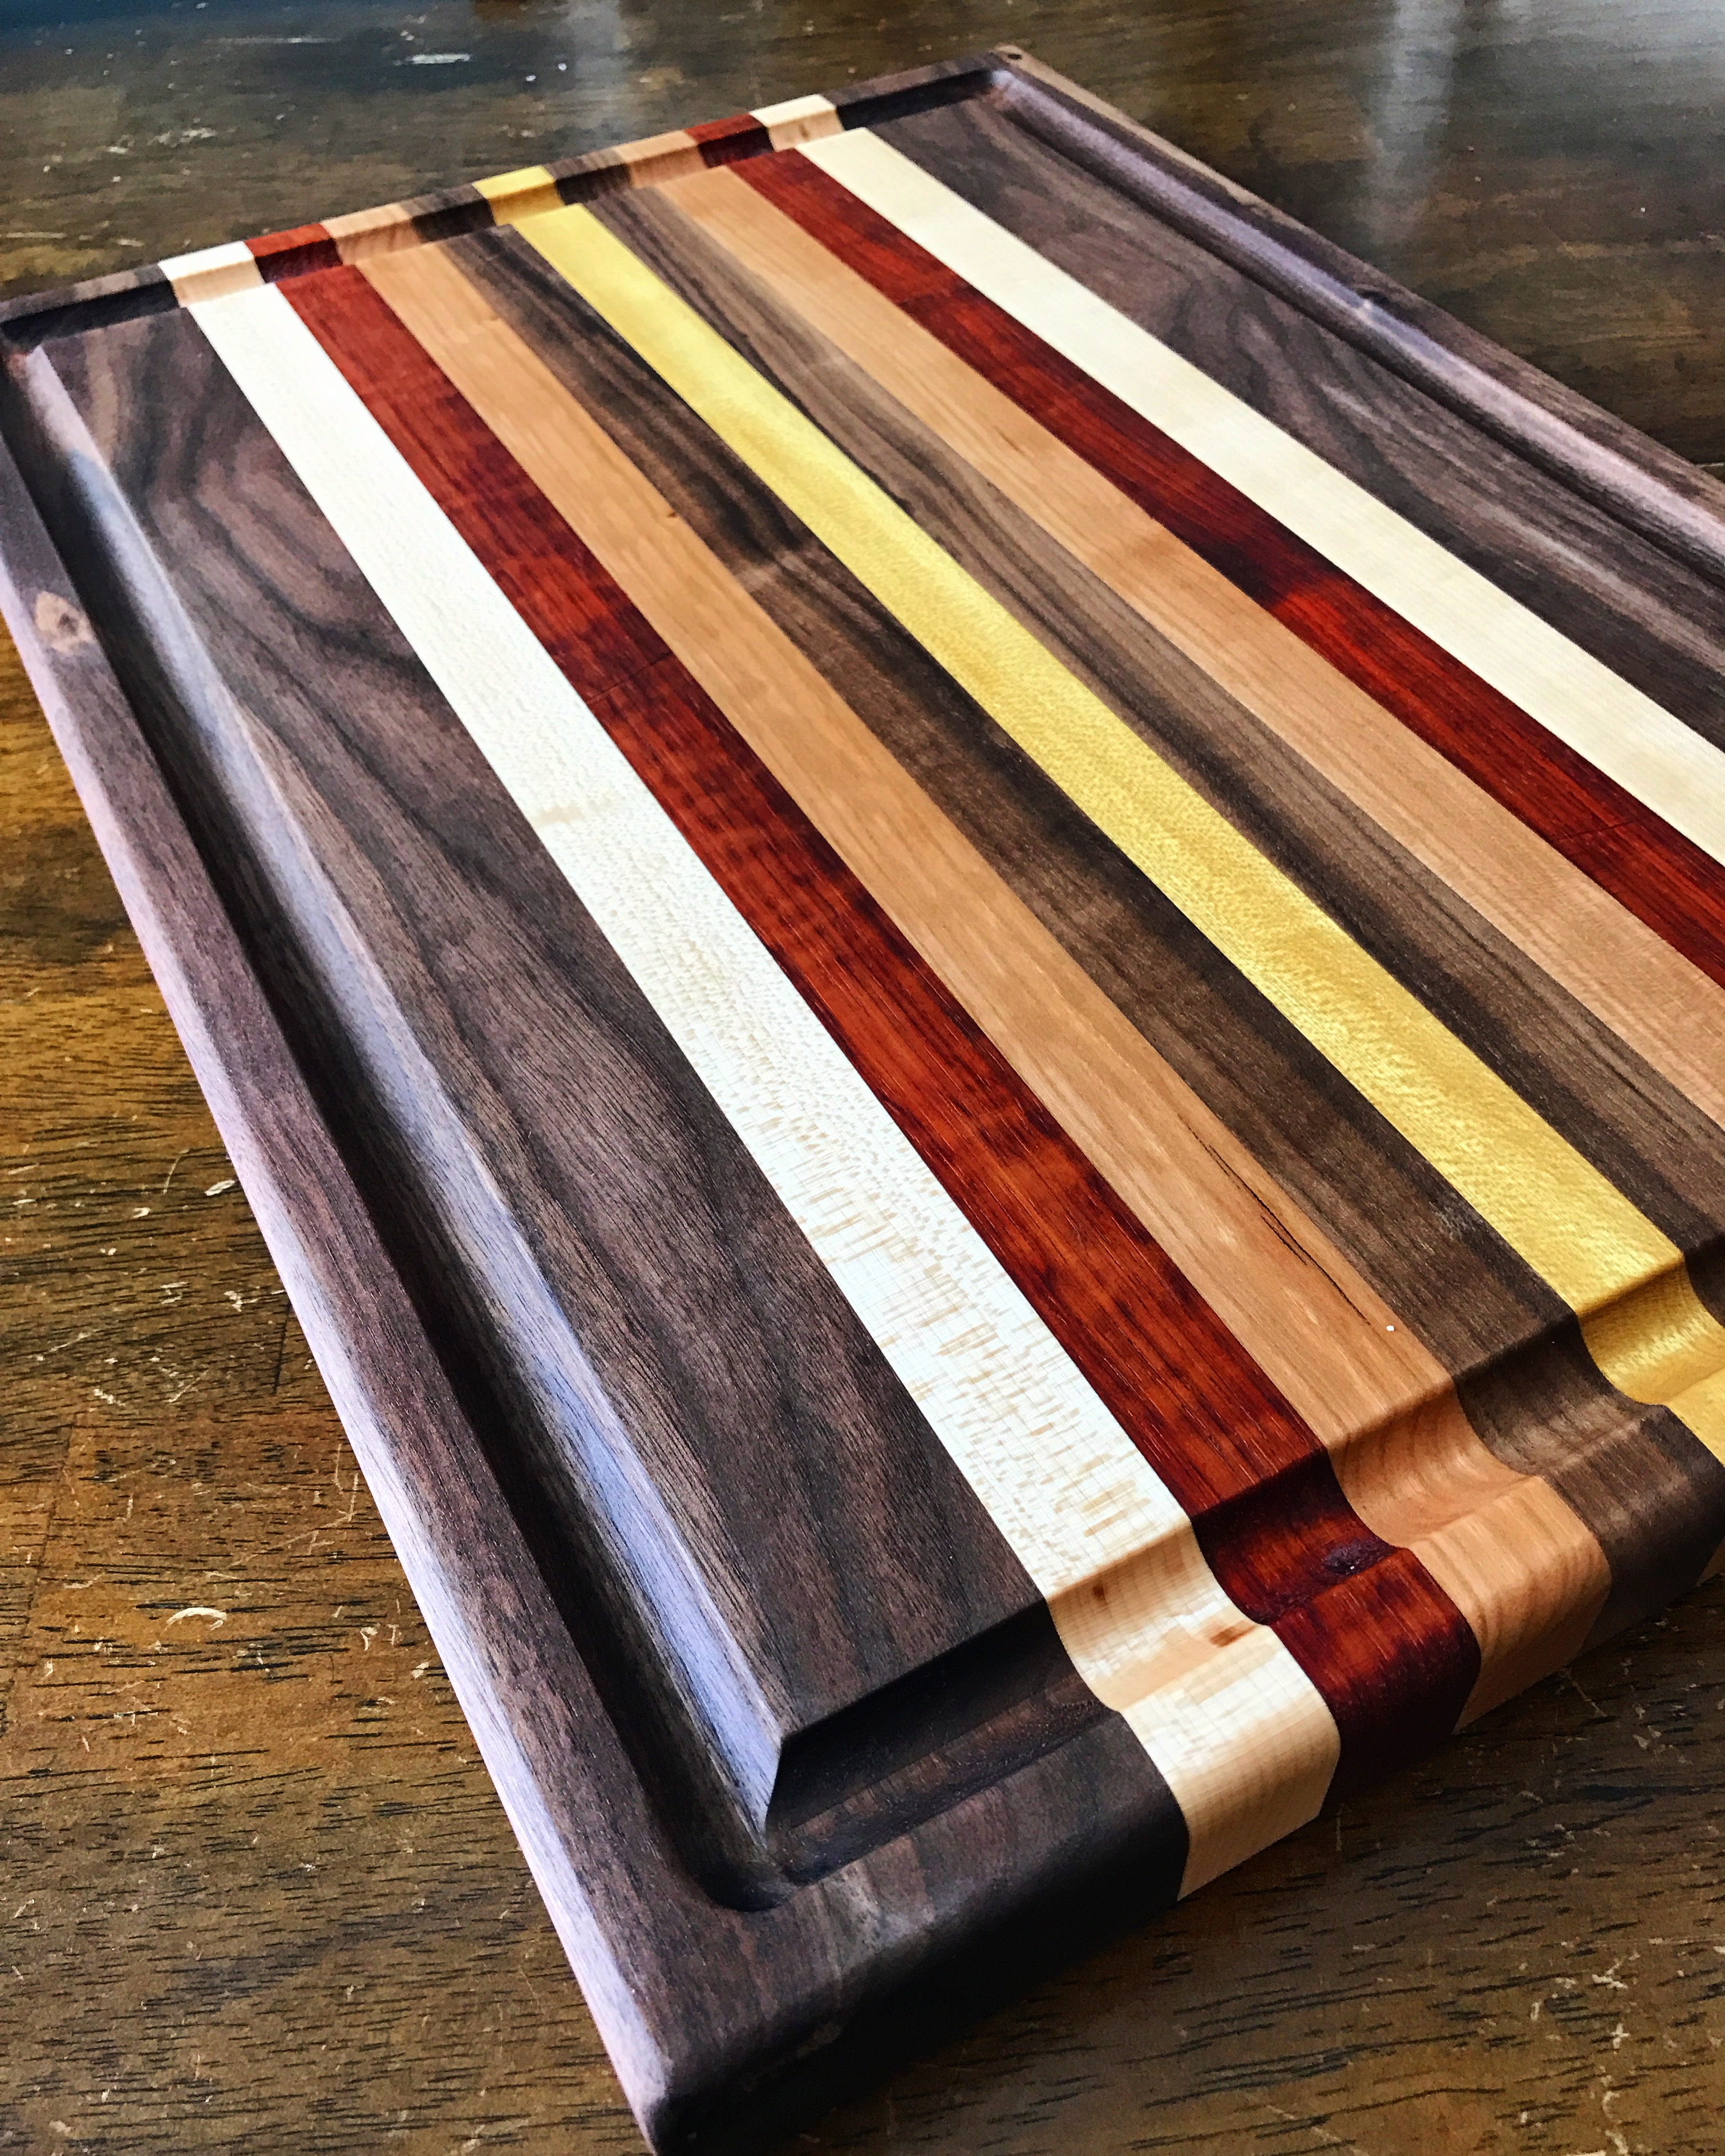 Product Review: Cutting Board from Flying Dust Woodworks